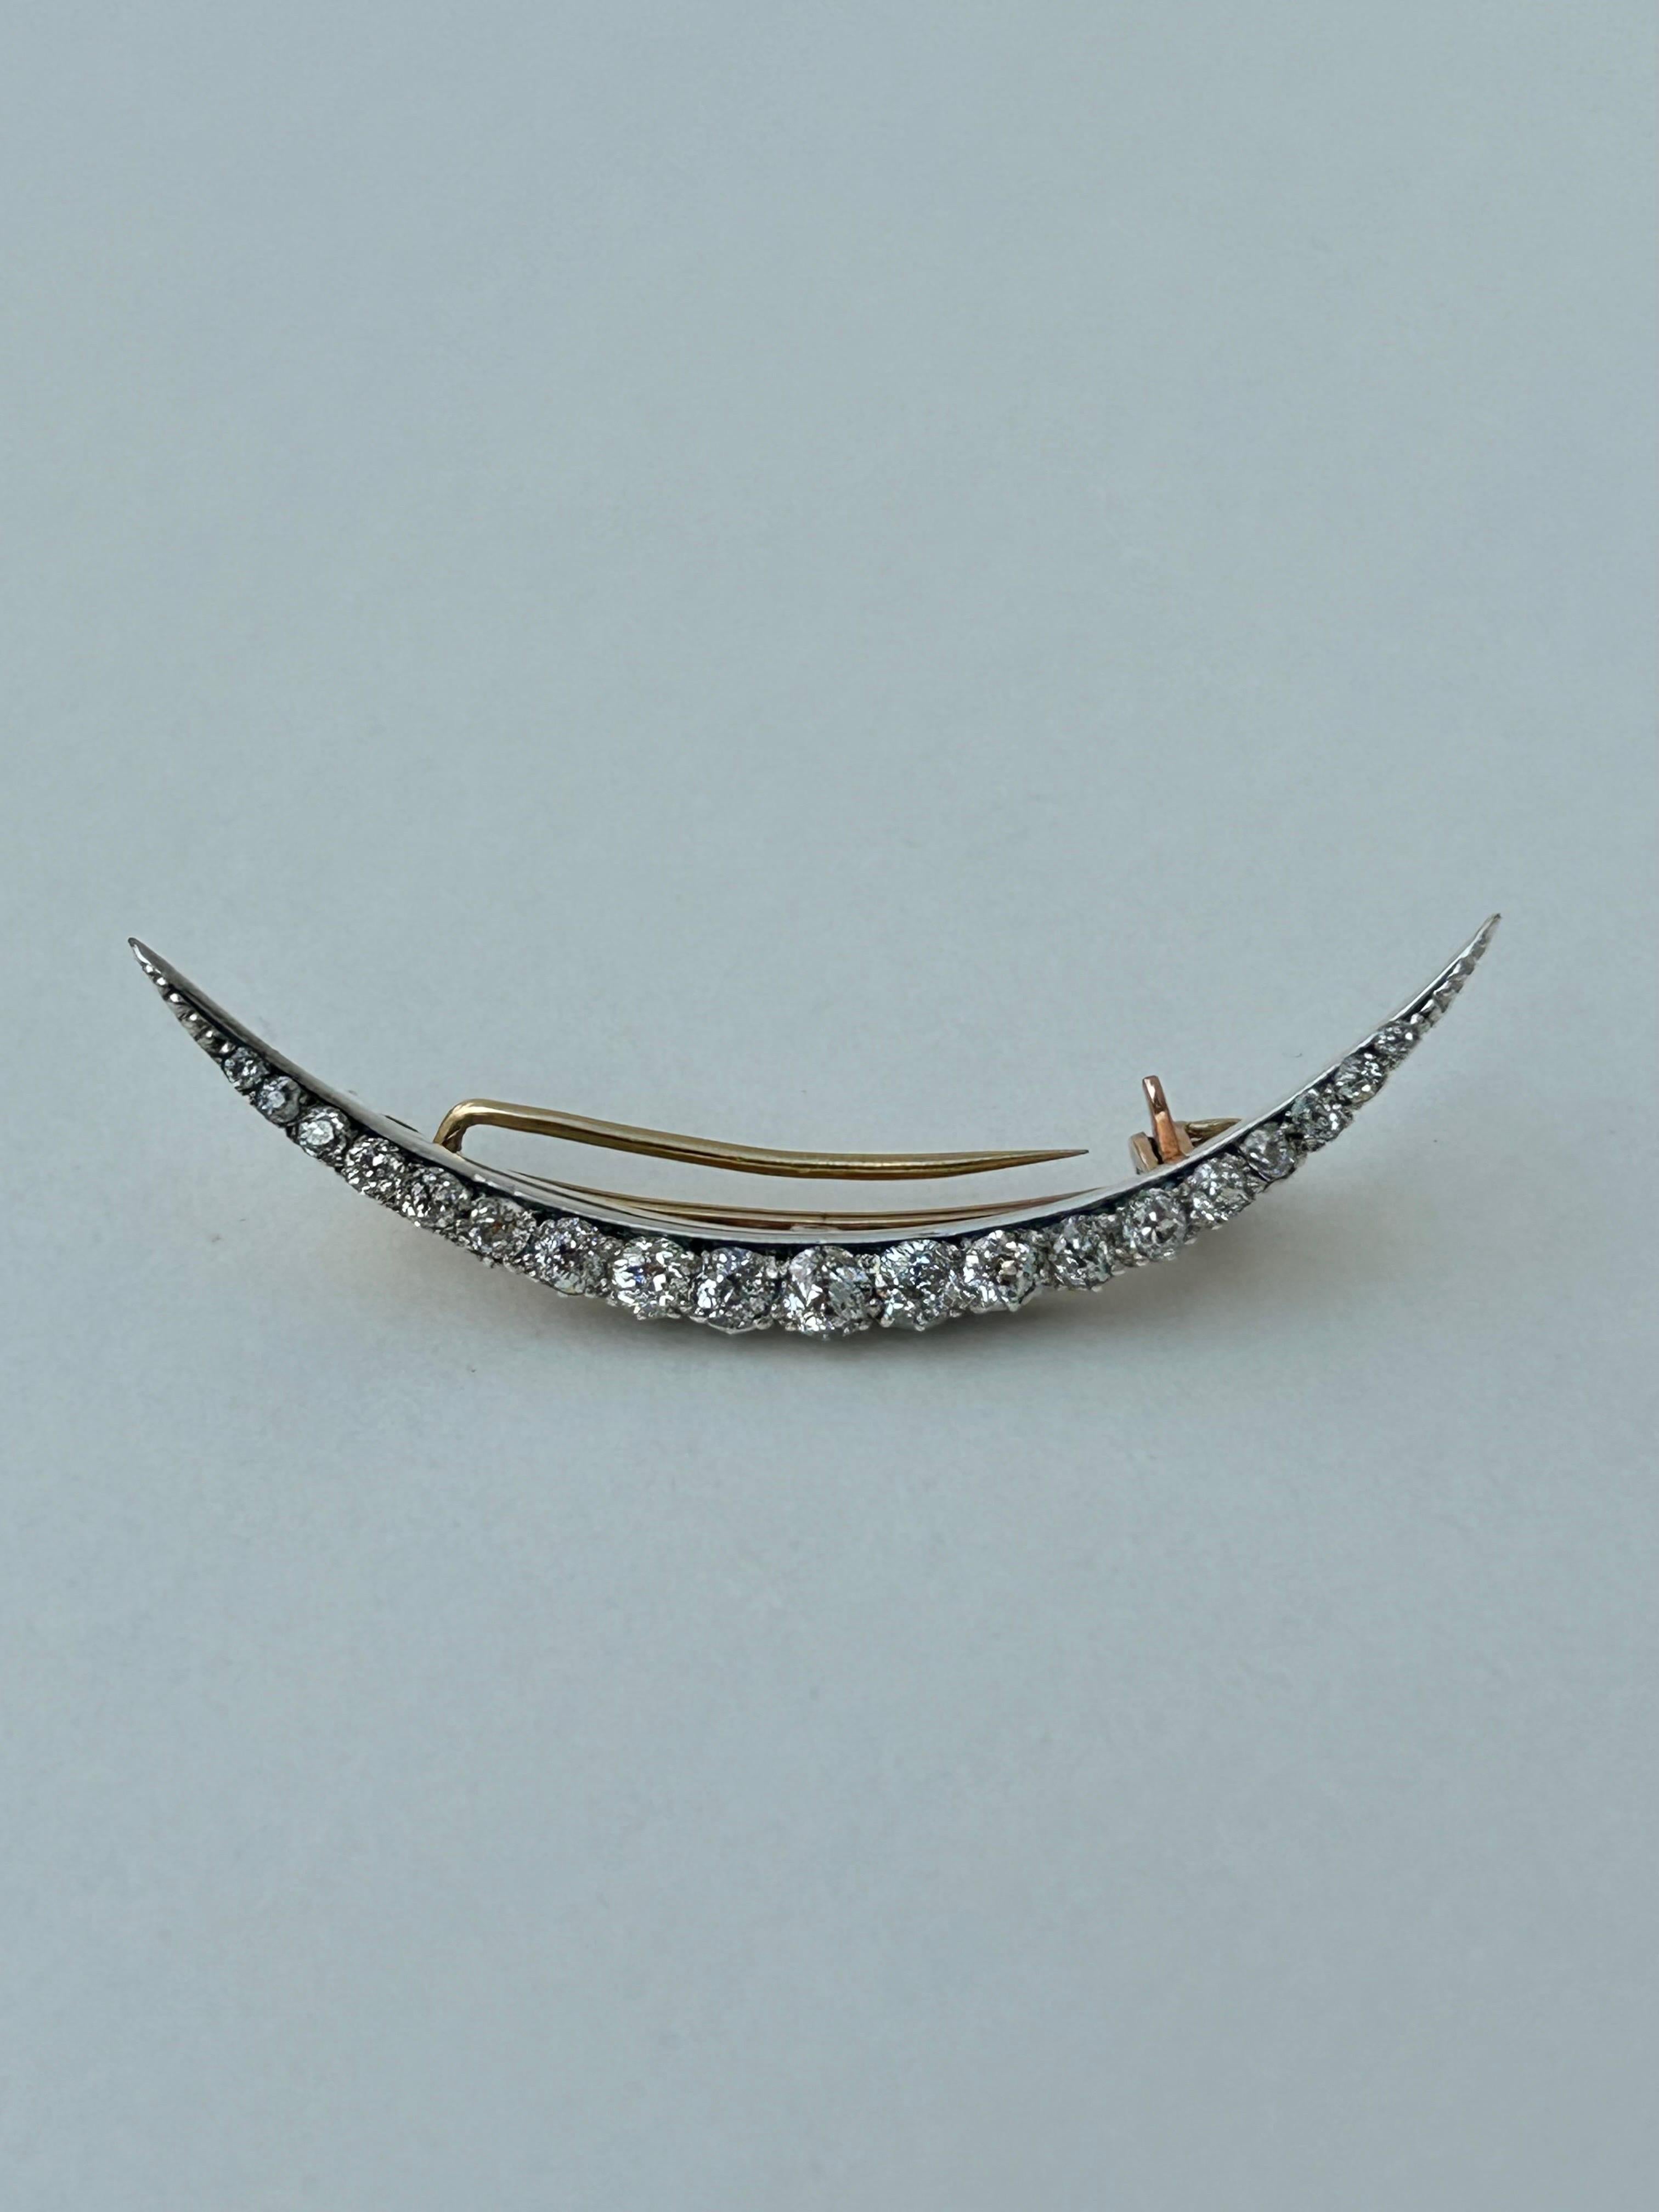 Antique Large Approx 1.80ct Diamond Crescent Brooch in Gold 

double pin for added security 
the most exquisite diamond crescent, truly beautiful 

The item comes without the box in the photos but will be presented in an Howard’s Antiques gift box
